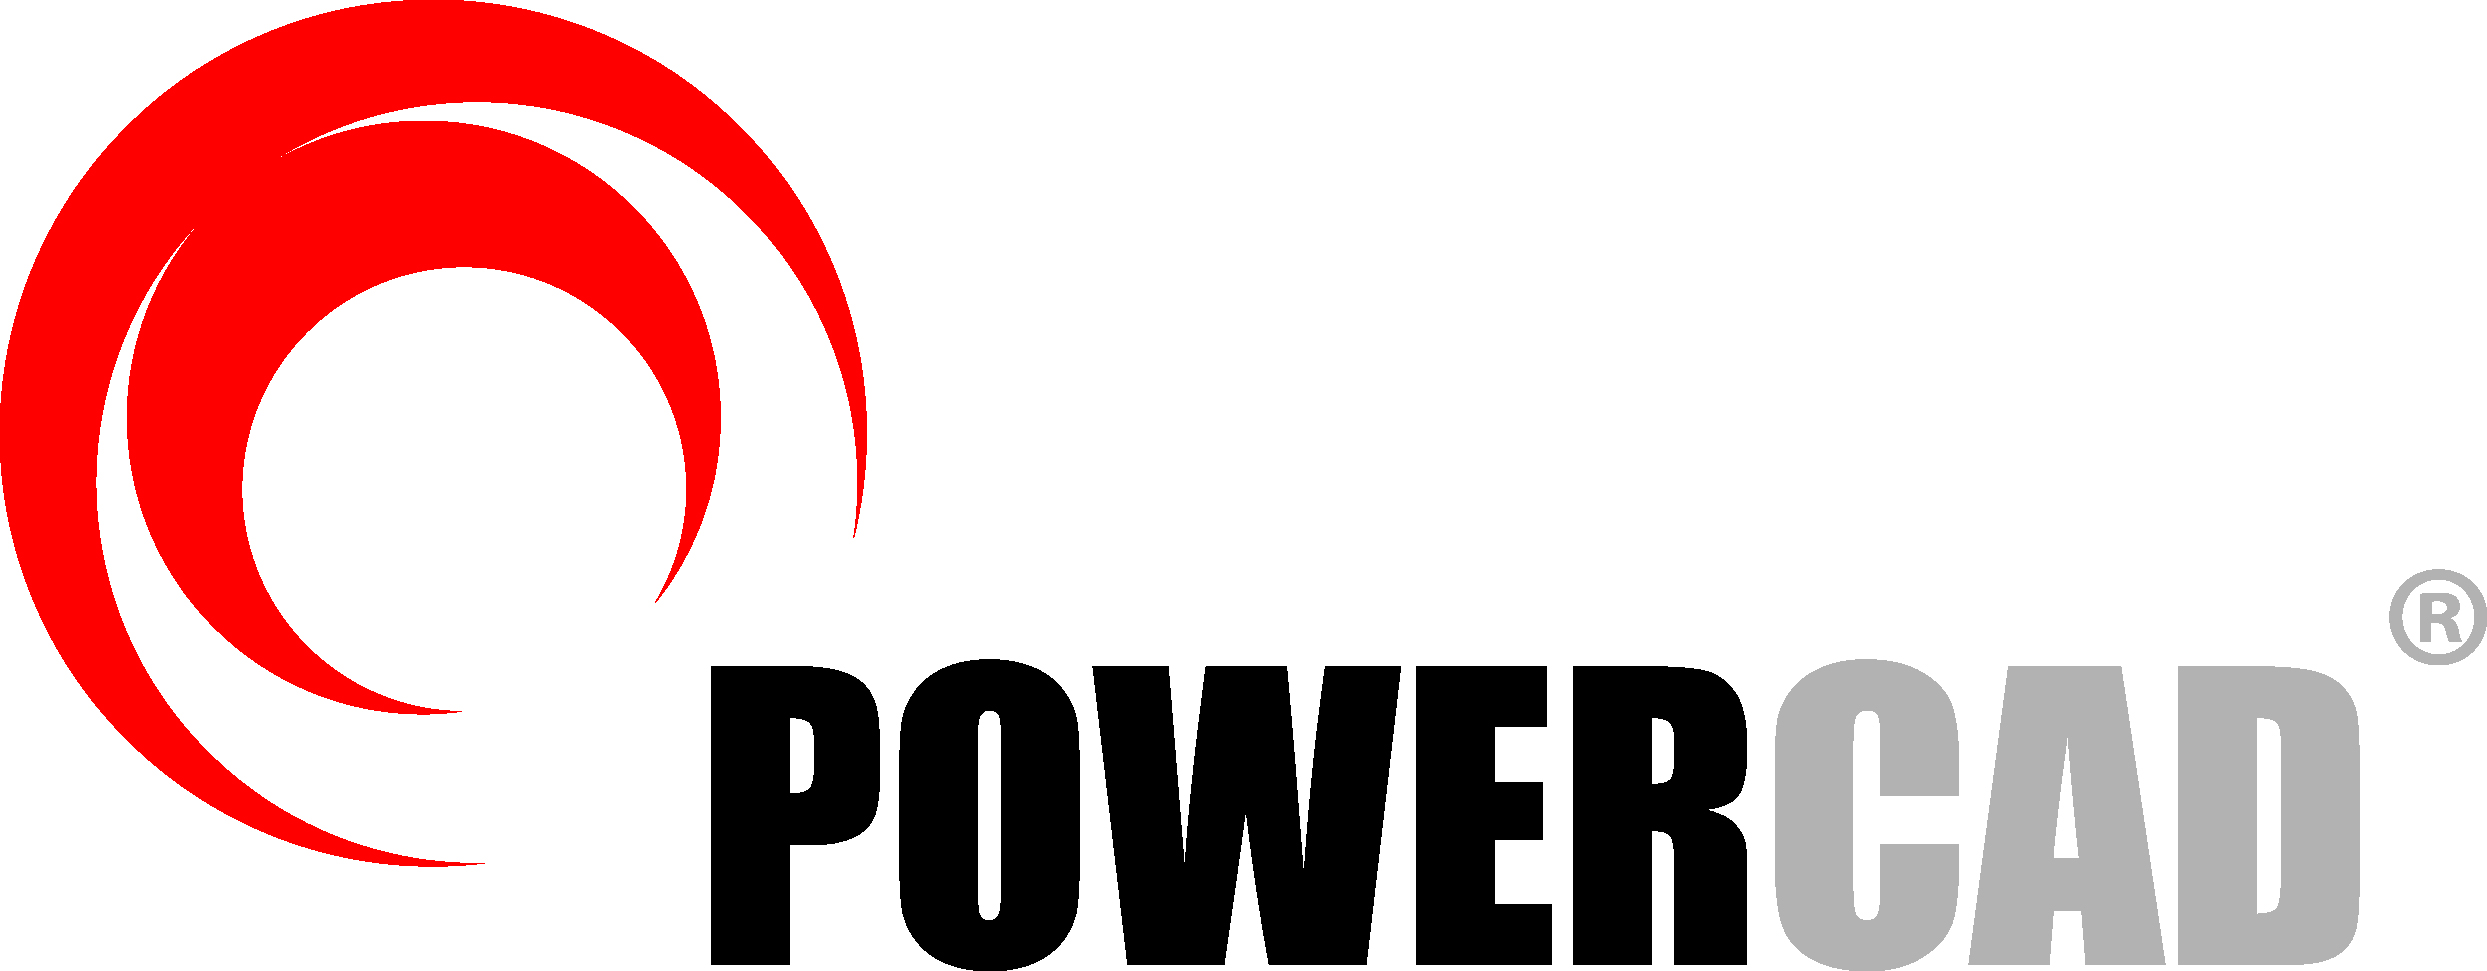 Electrical Engineering Design Software PowerCad Logo